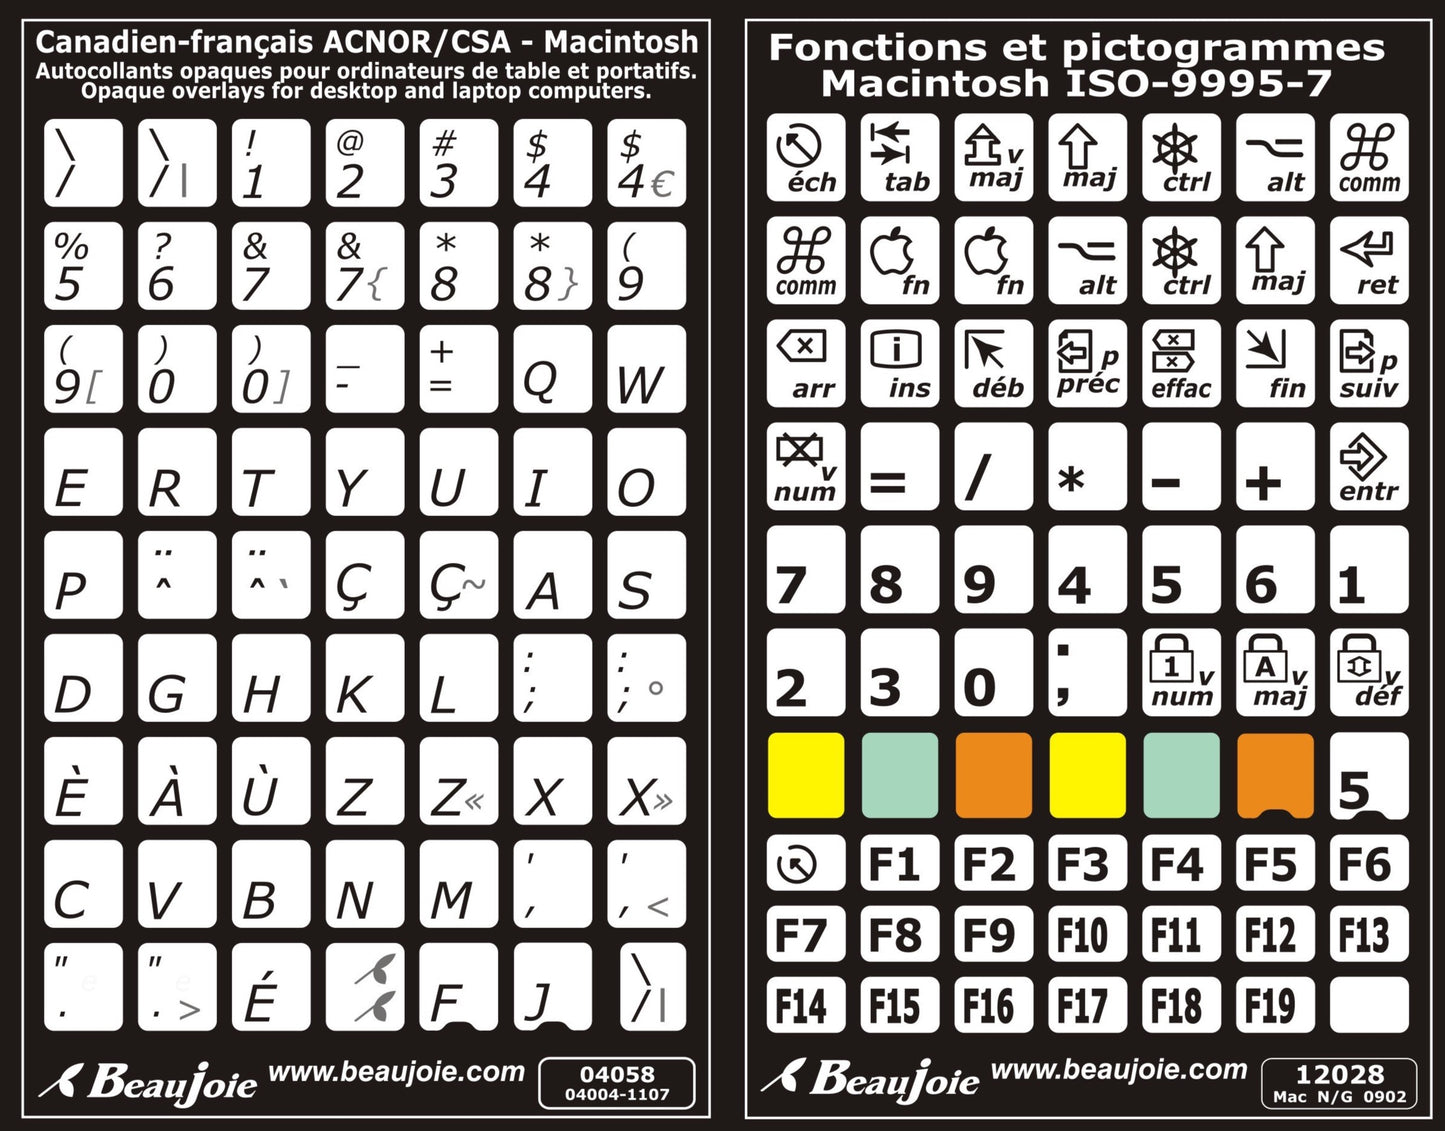 Stickers for Mac Keyboard (Canadian French) with function keys in French - 04058-12028